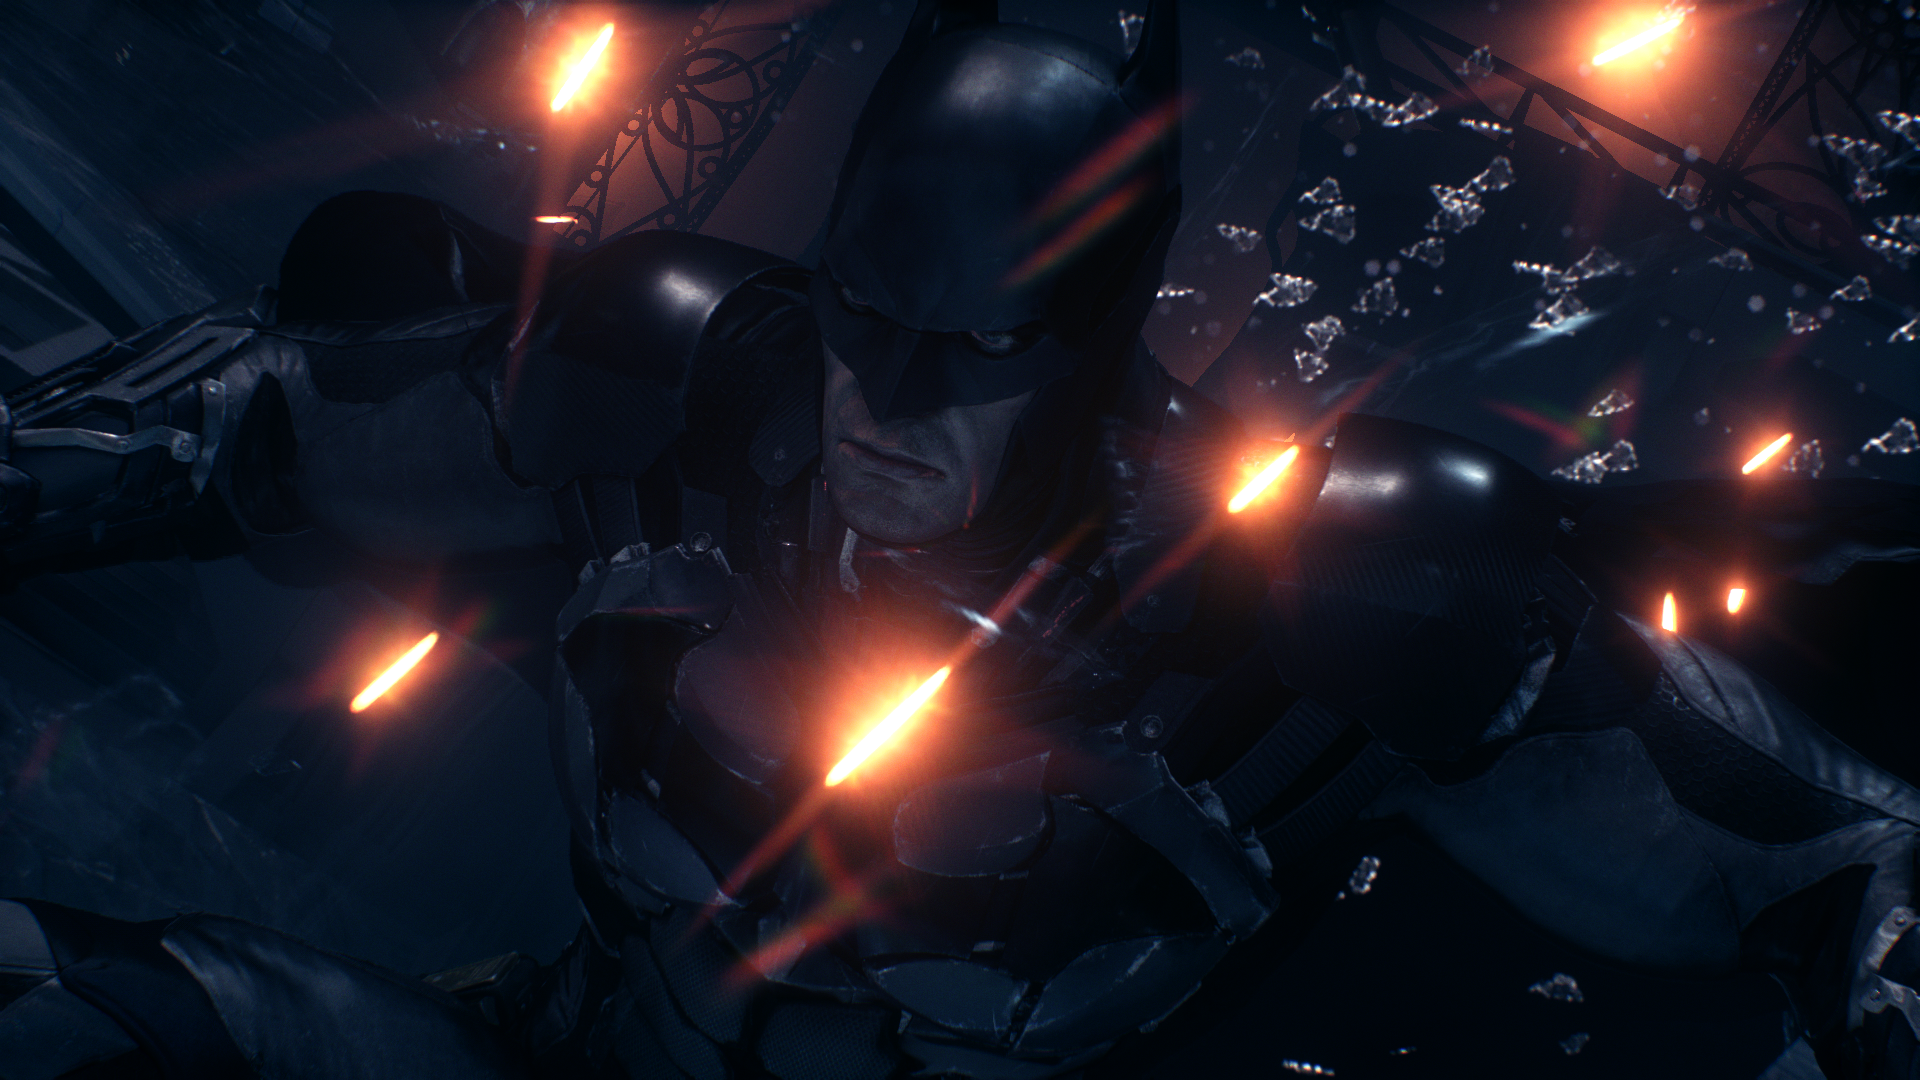 batman_arkham_knight_10_by_gamephotography-d9df1g8.png